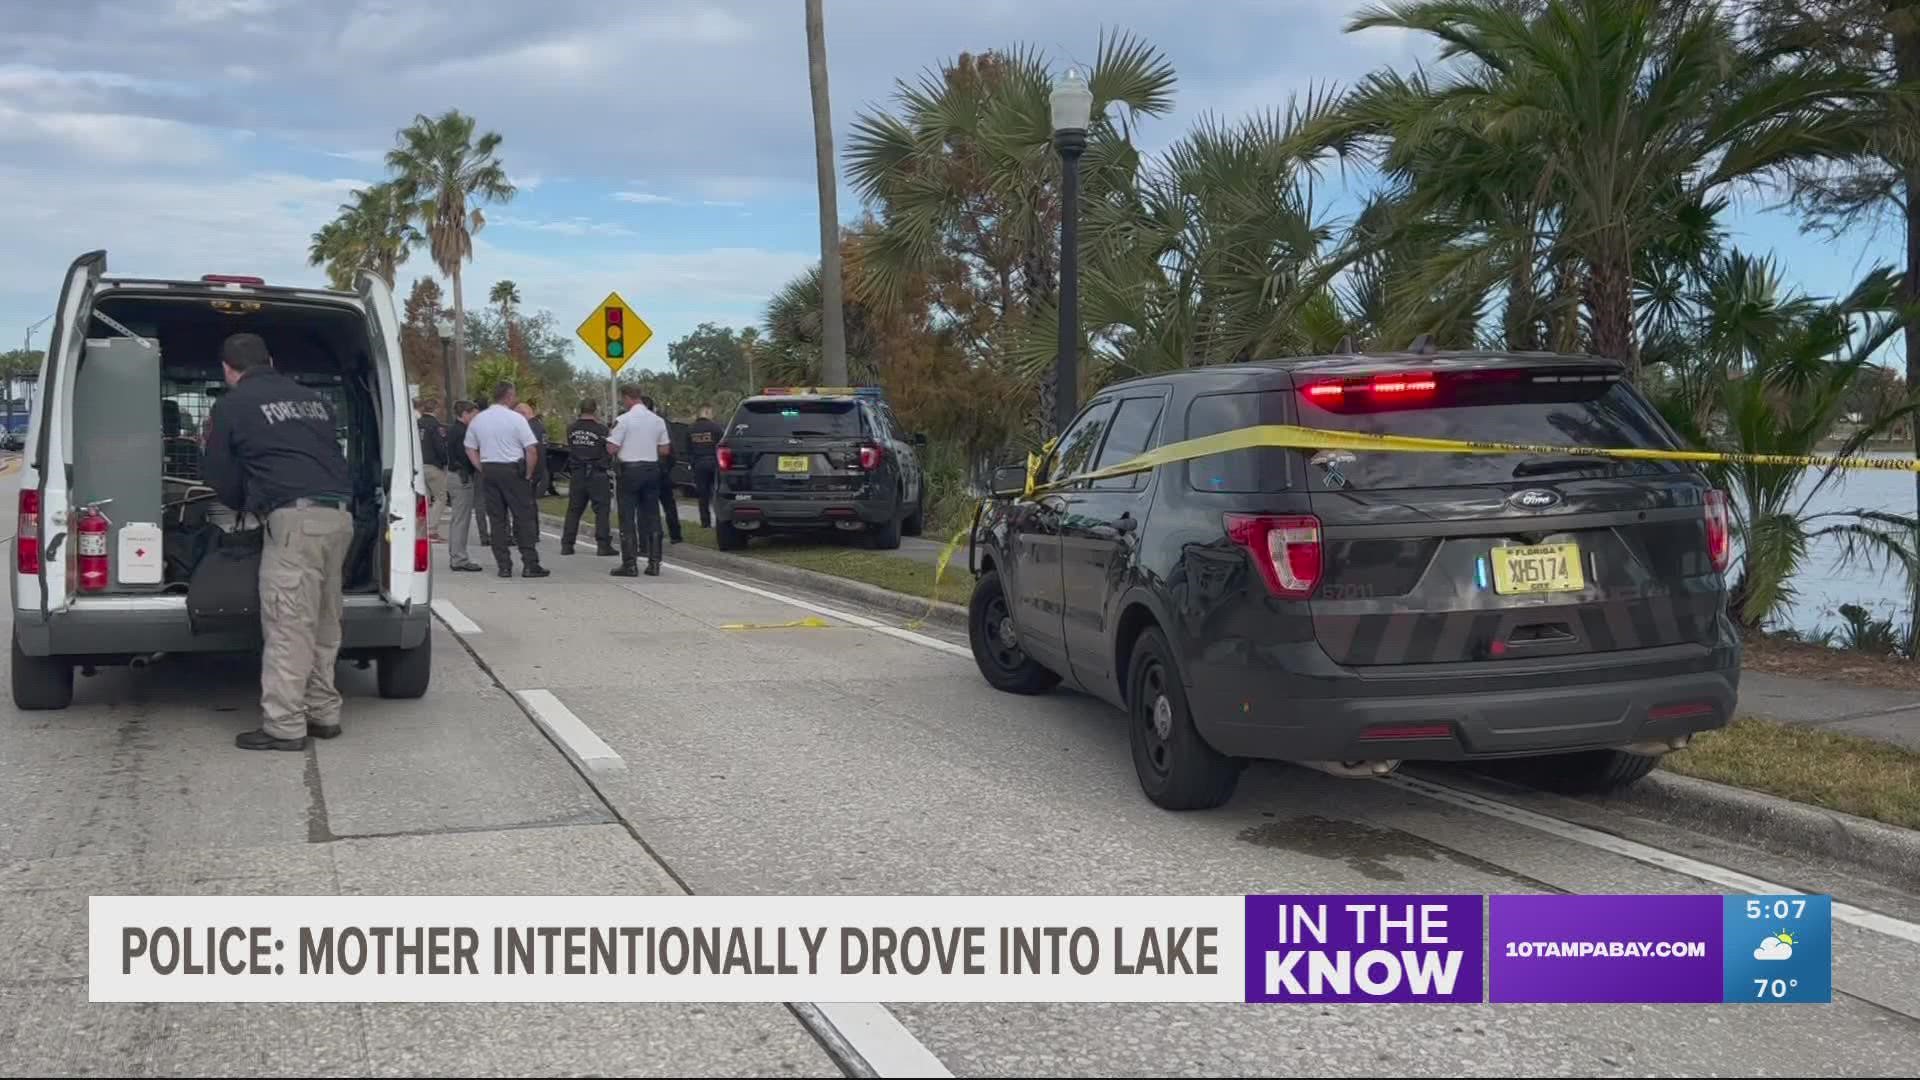 Police said family members told them the mother had possibly been "experiencing mental health issues" in the days leading up to the car's submersion.